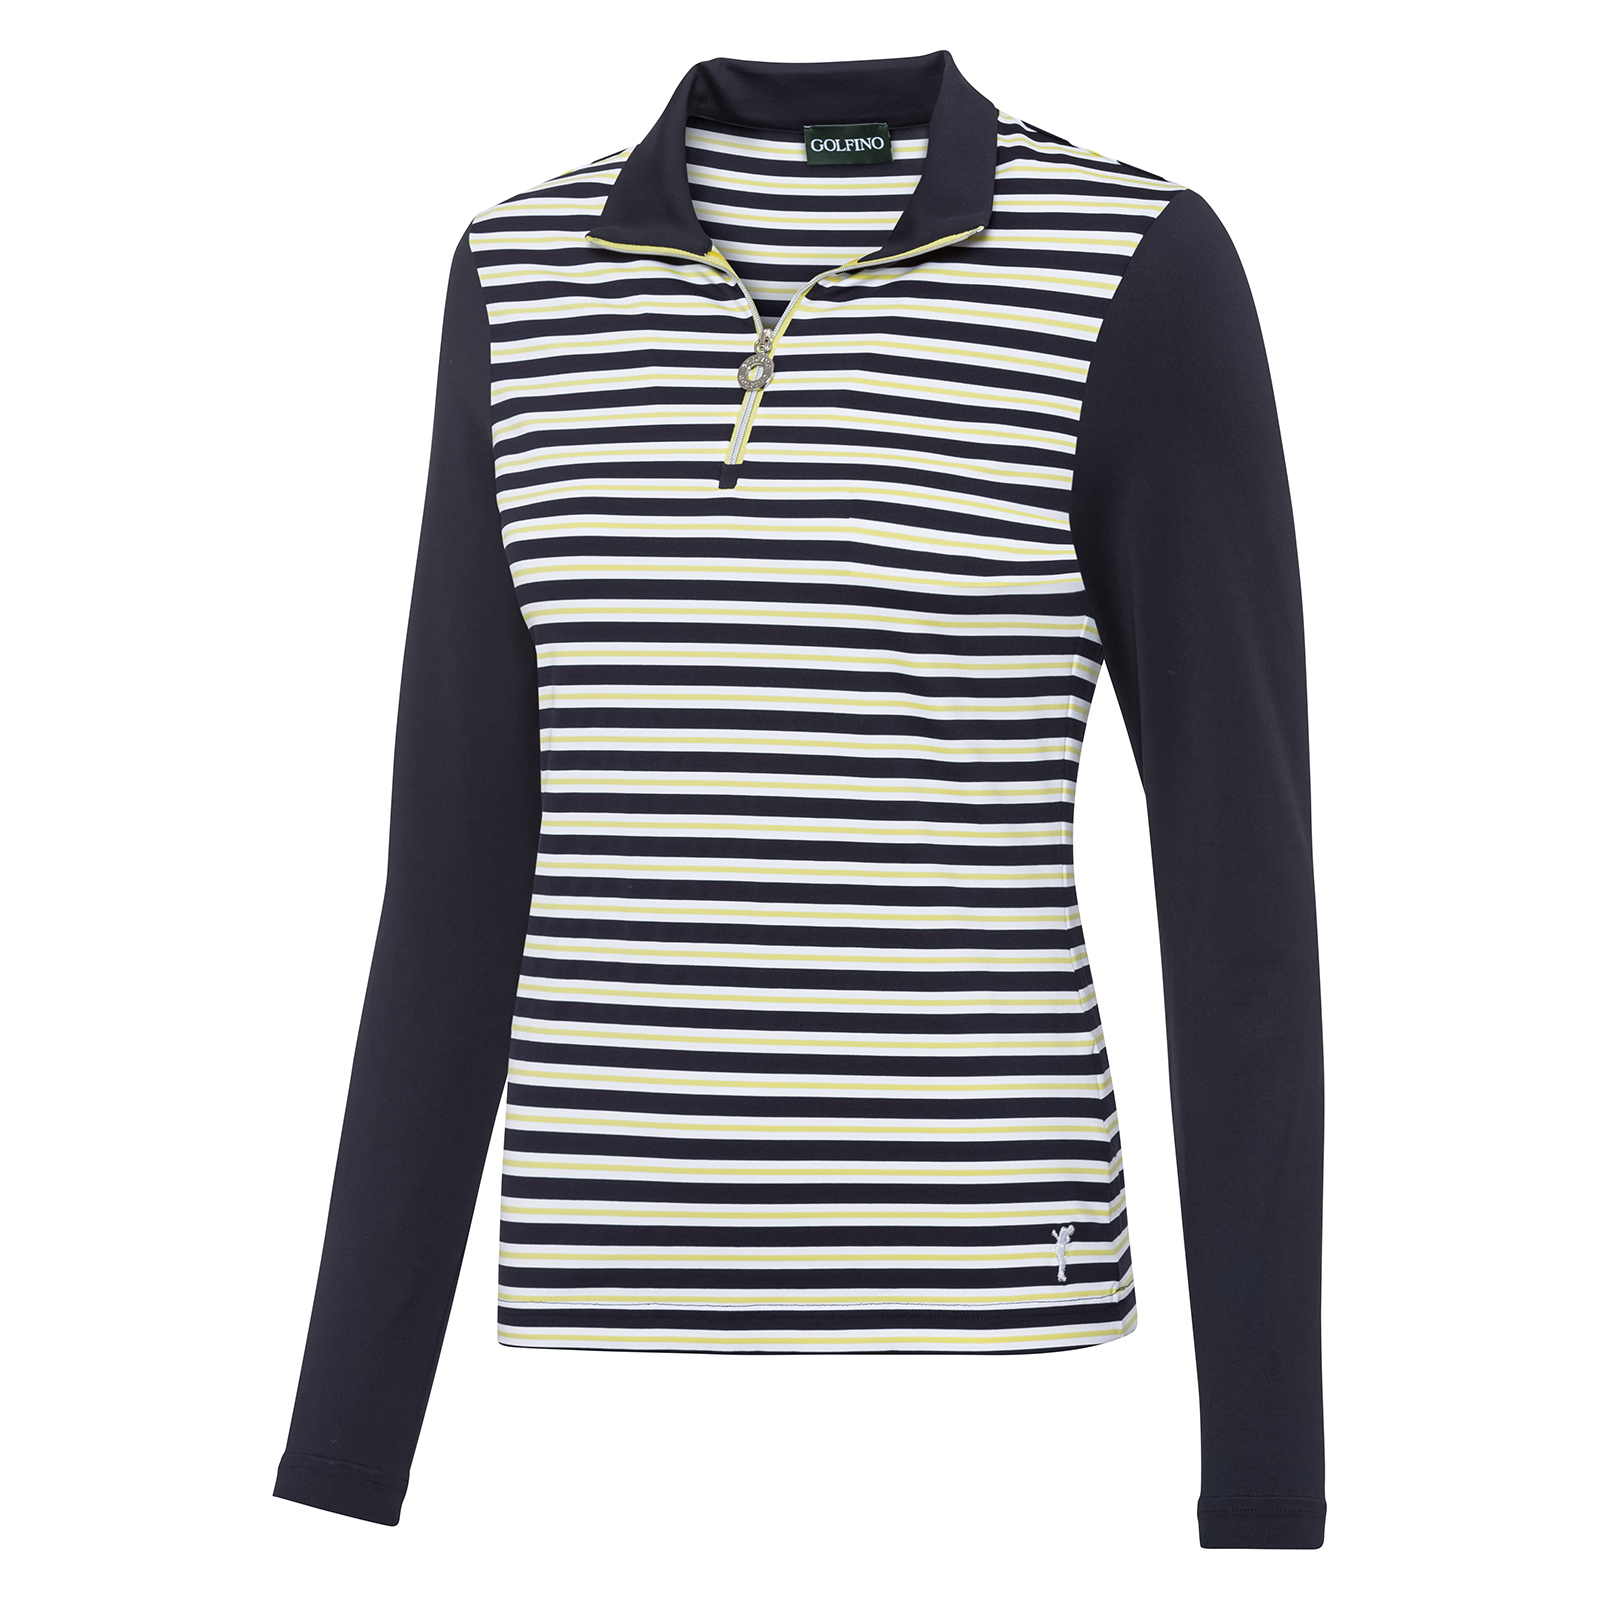 Ladies' breathable golf sweater